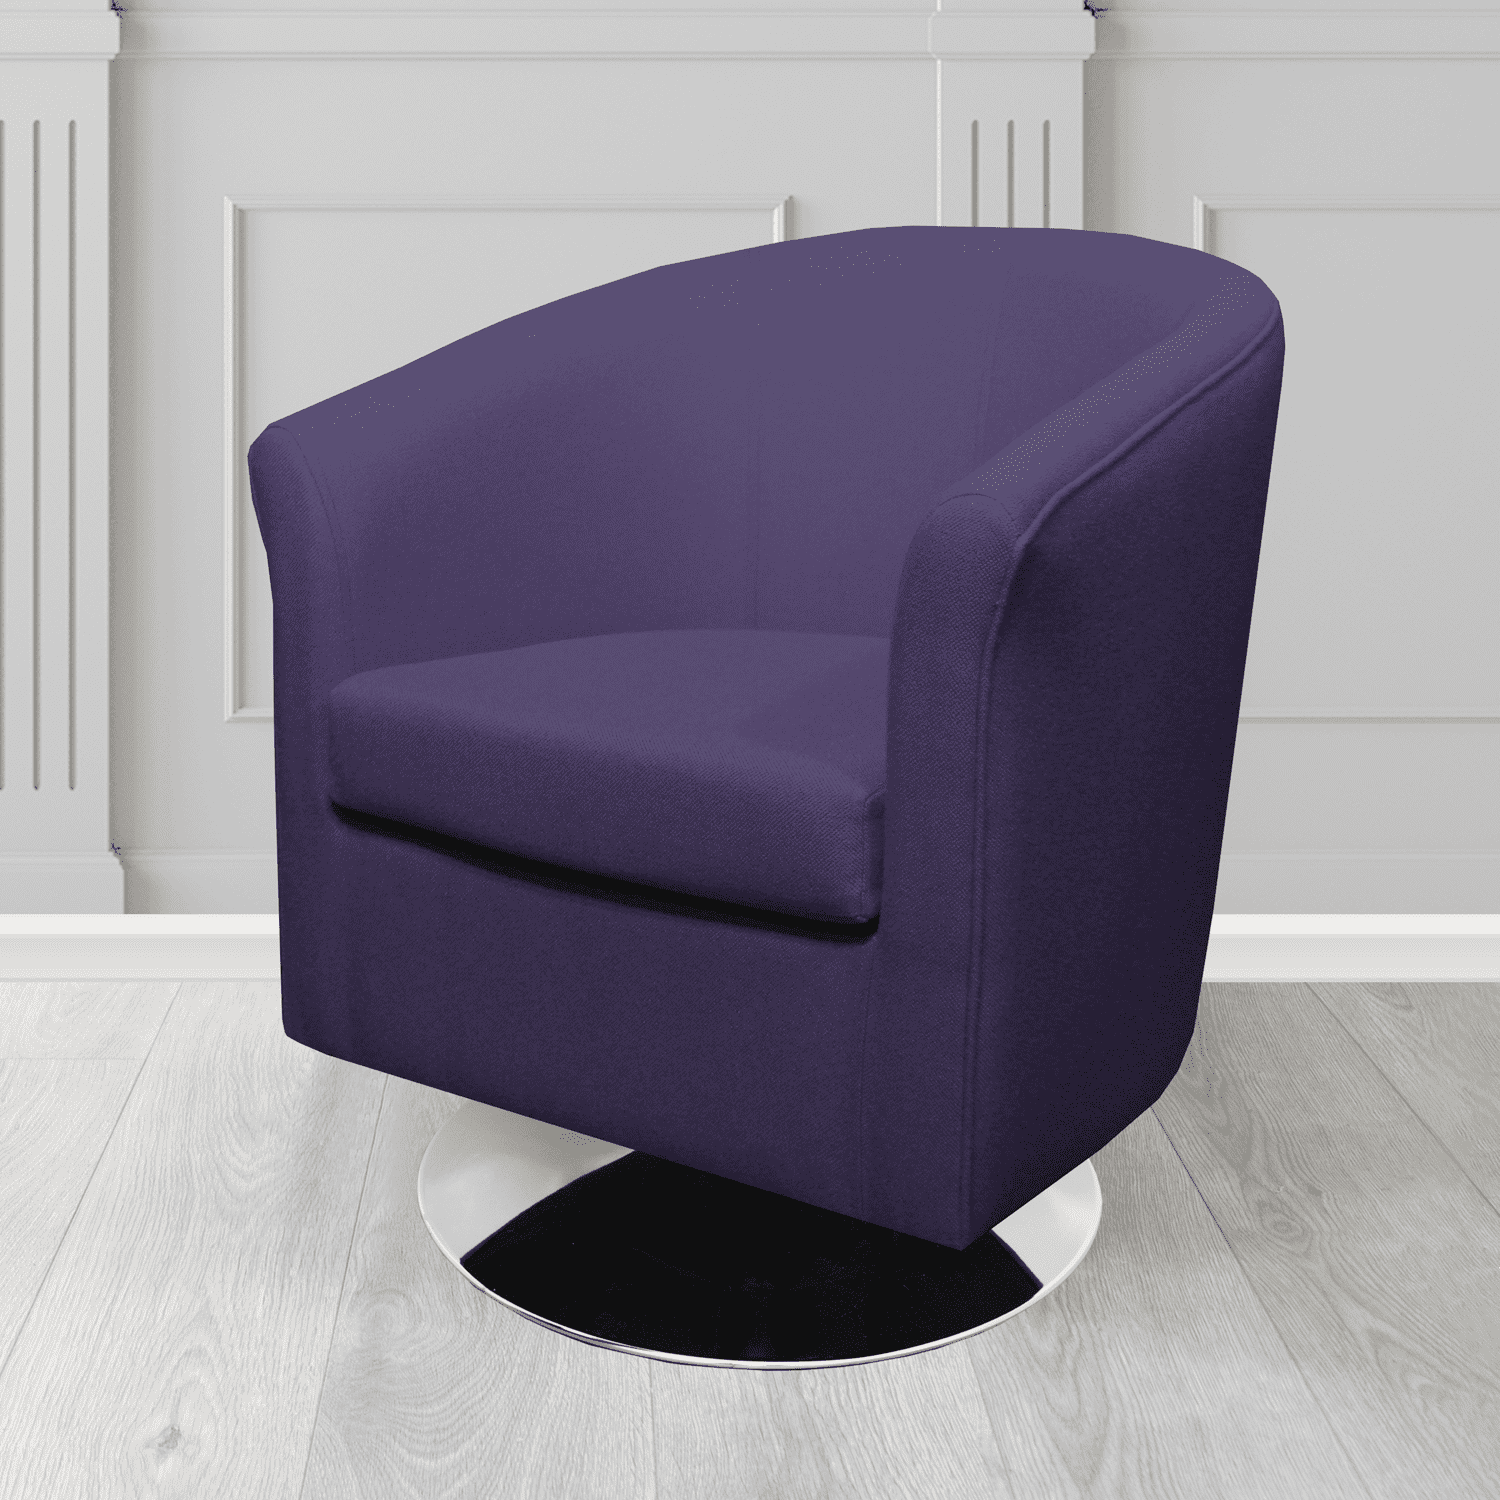 Tuscany Swivel Tub ChaIr in Mainline Plus Prudence IF250 Crib 5 Fabric - The Tub Chair Shop